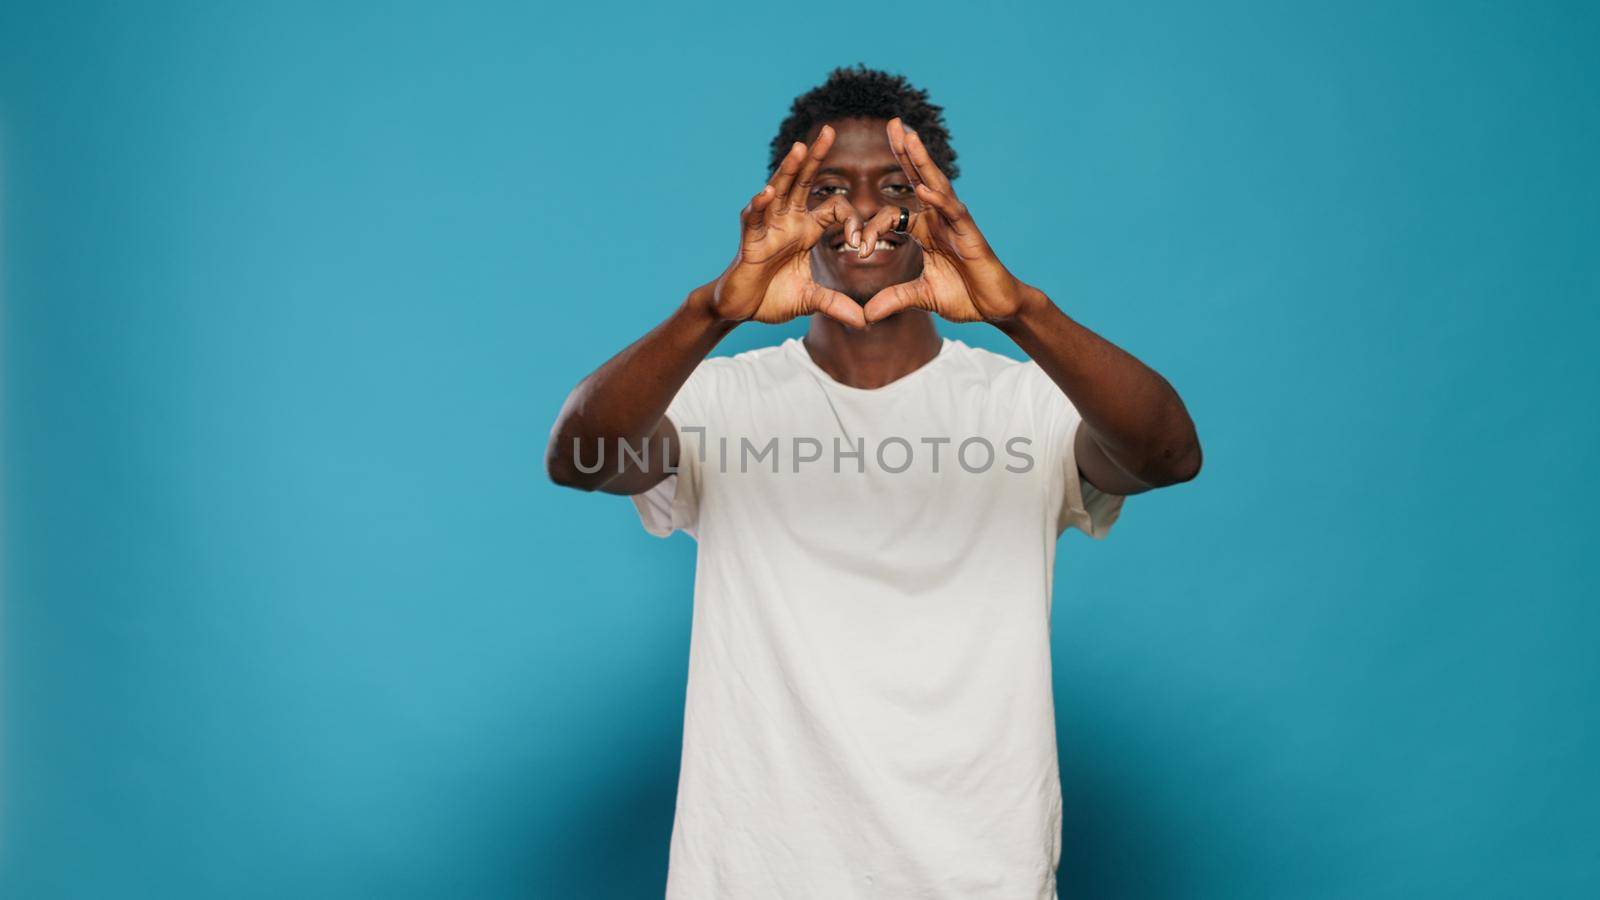 Joyful man doing heart shape symbol with hands while looking at camera. Romantic person showing love sign for valentines day. Adult celebrating romance with affectionate gesture.